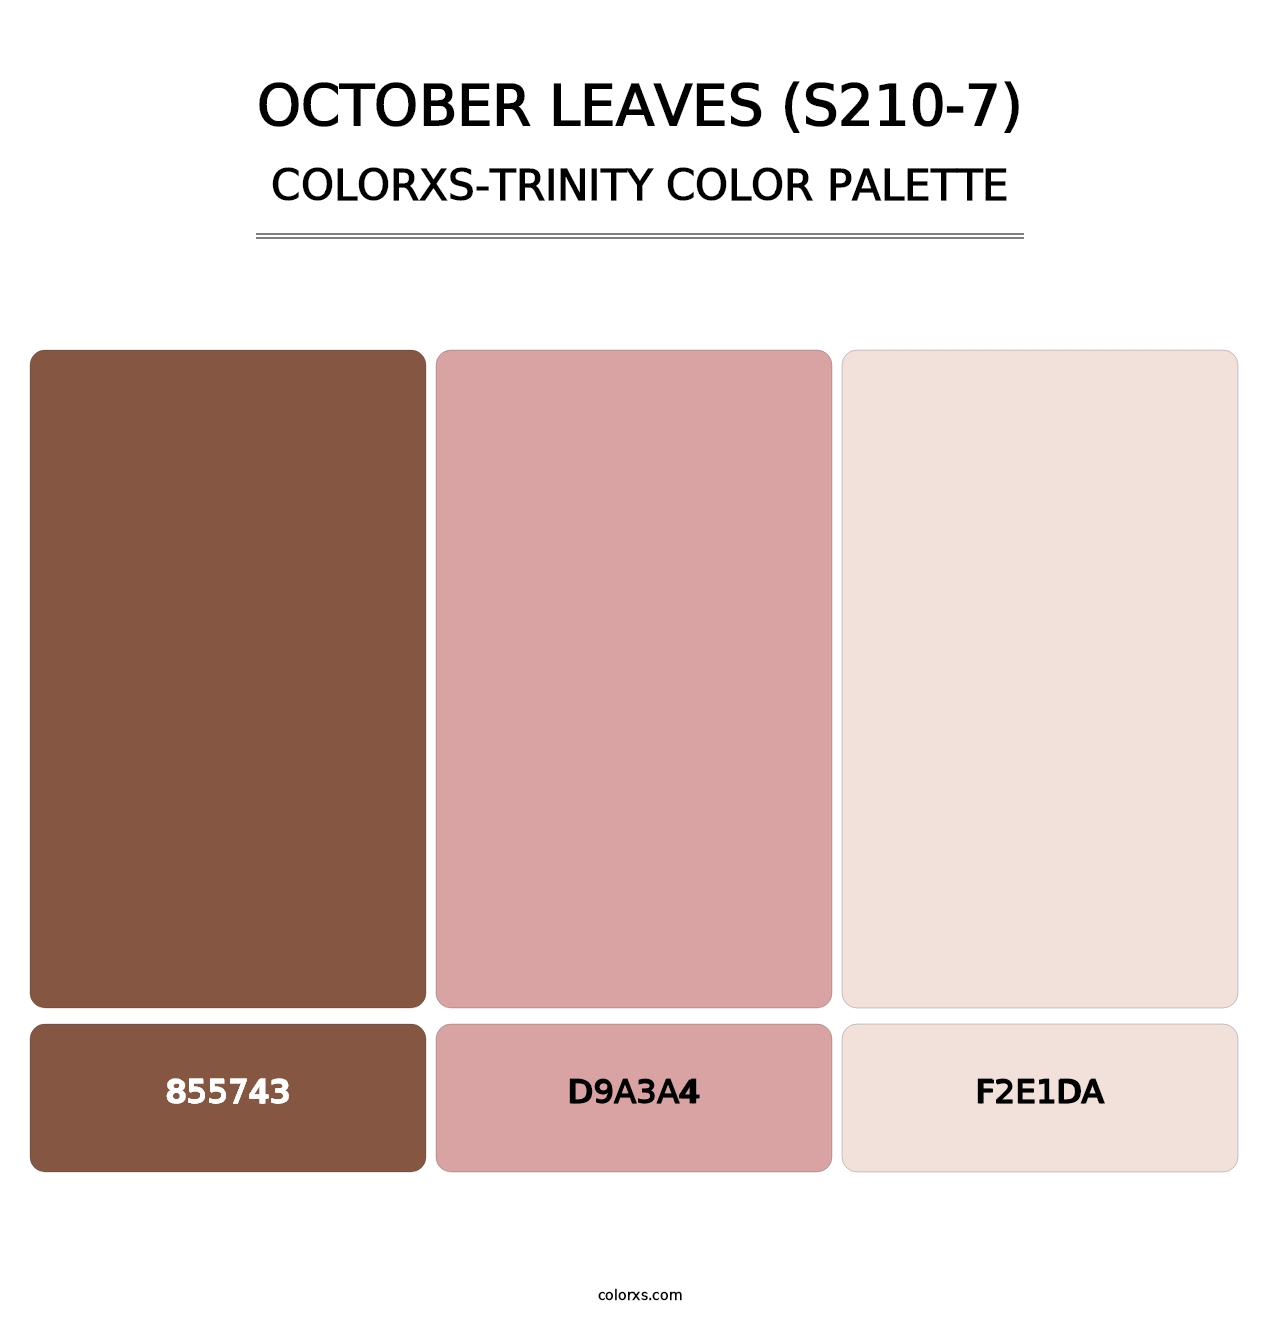 October Leaves (S210-7) - Colorxs Trinity Palette